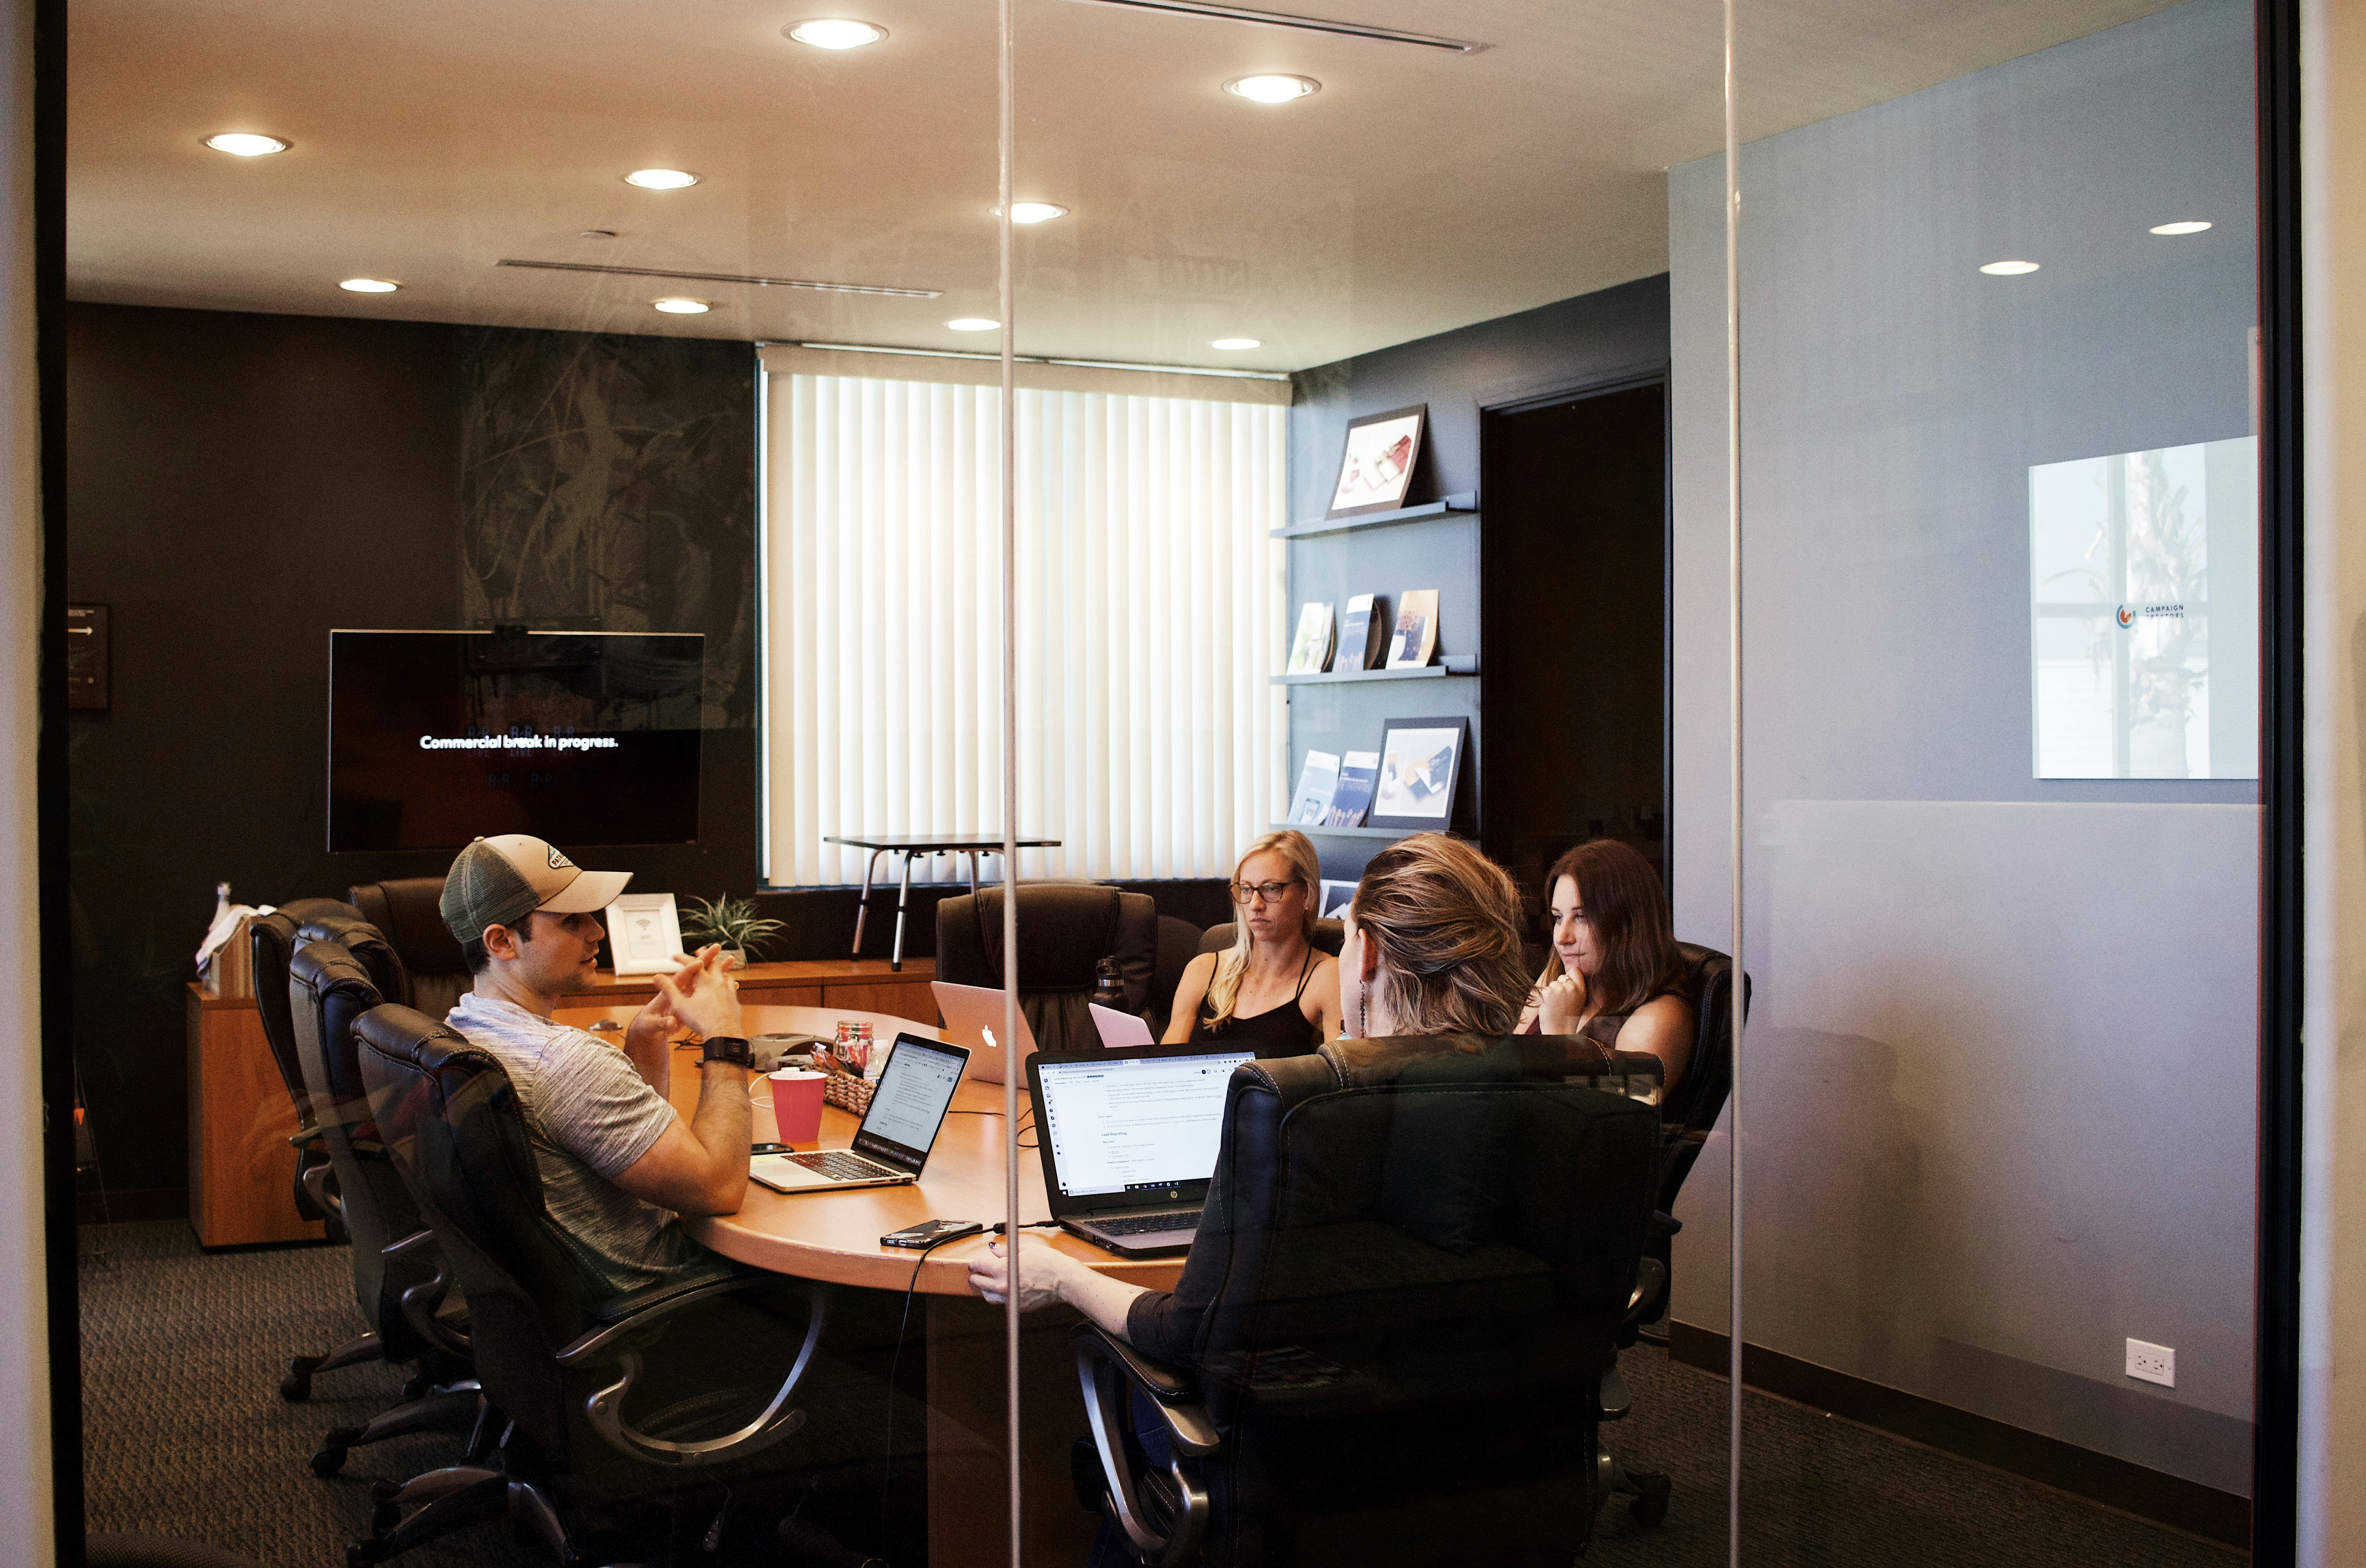 Group of people having a meeting in an office board room with laptops, audio systems and TV's